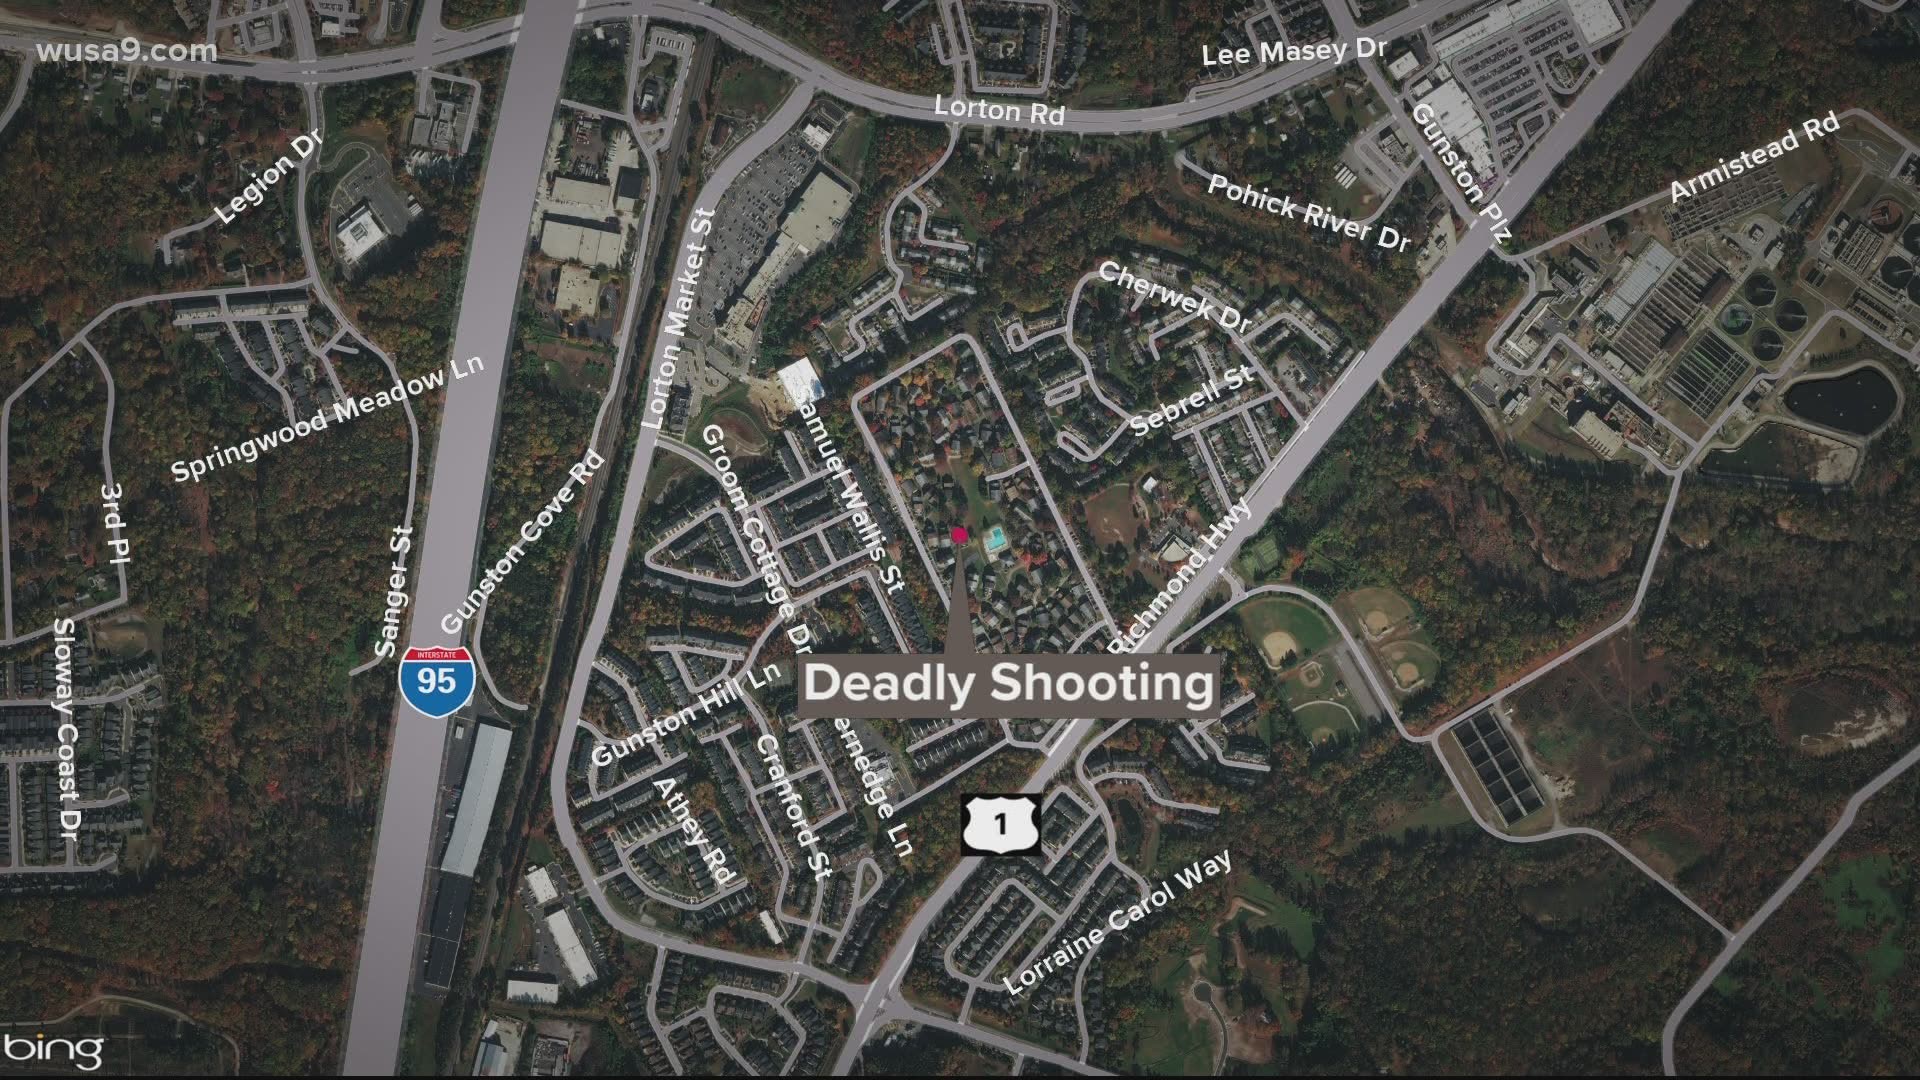 The second shooting victim was taken to a nearby hospital with life-threatening injuries.